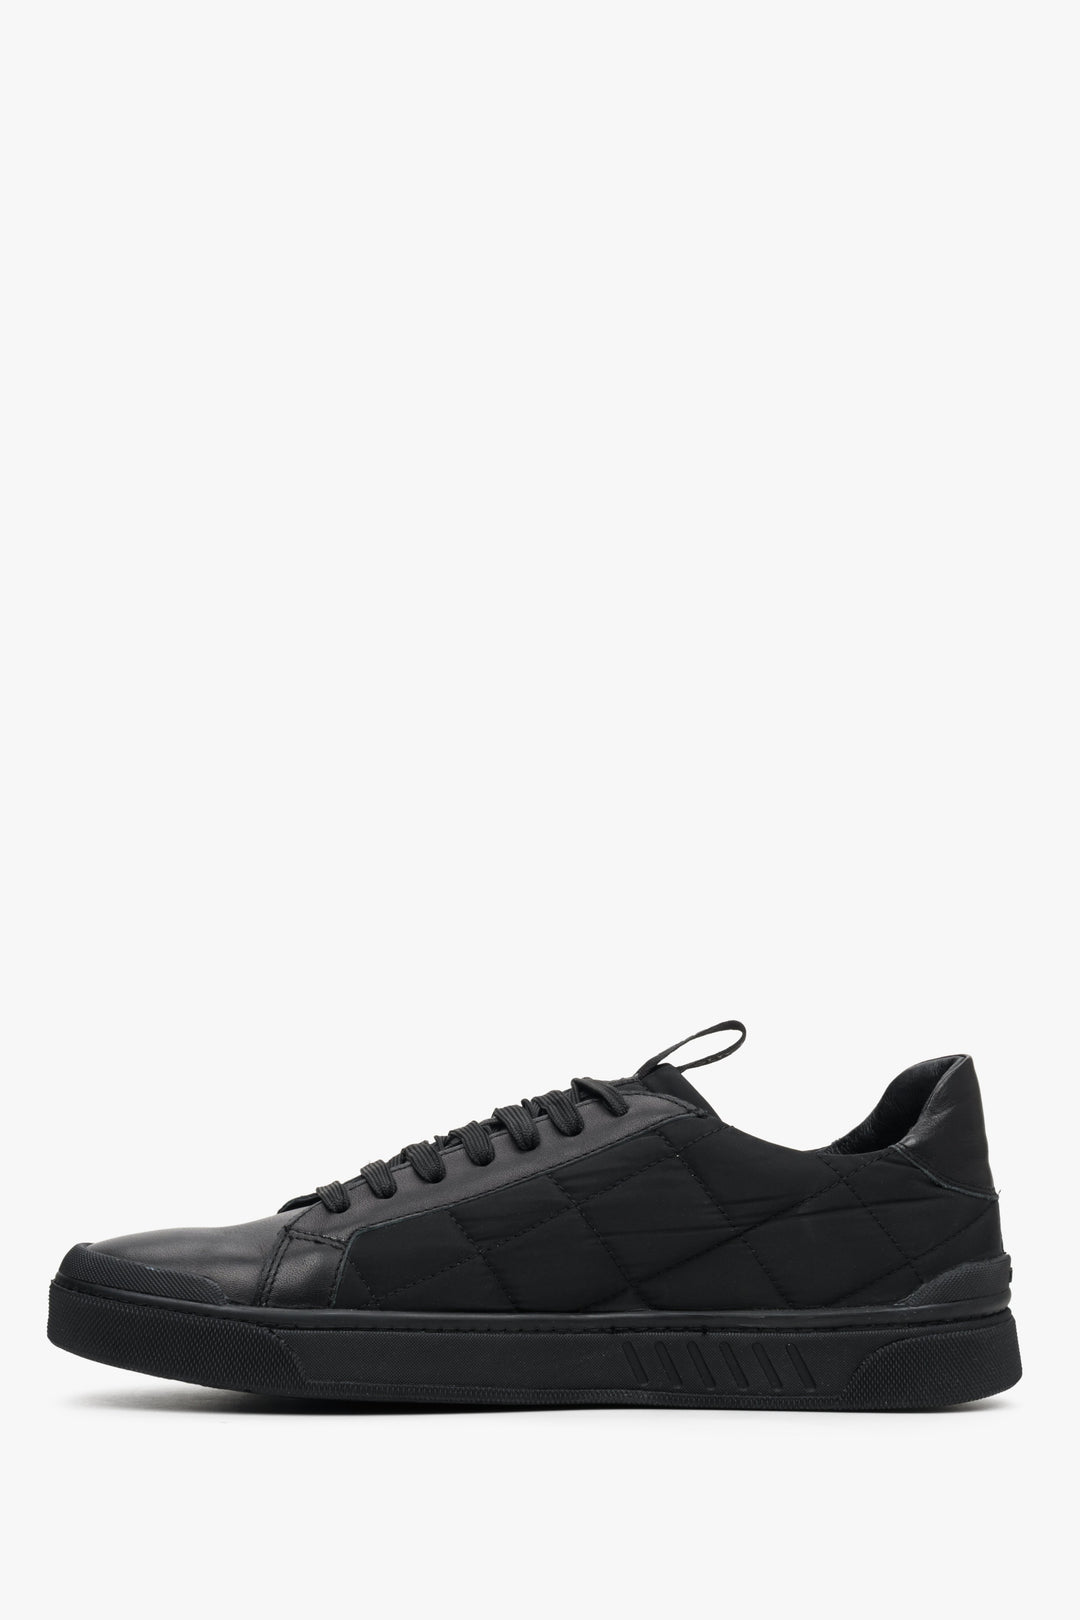 Men's sneakers in black color from natural leather and textiles Estro - shoe profile.